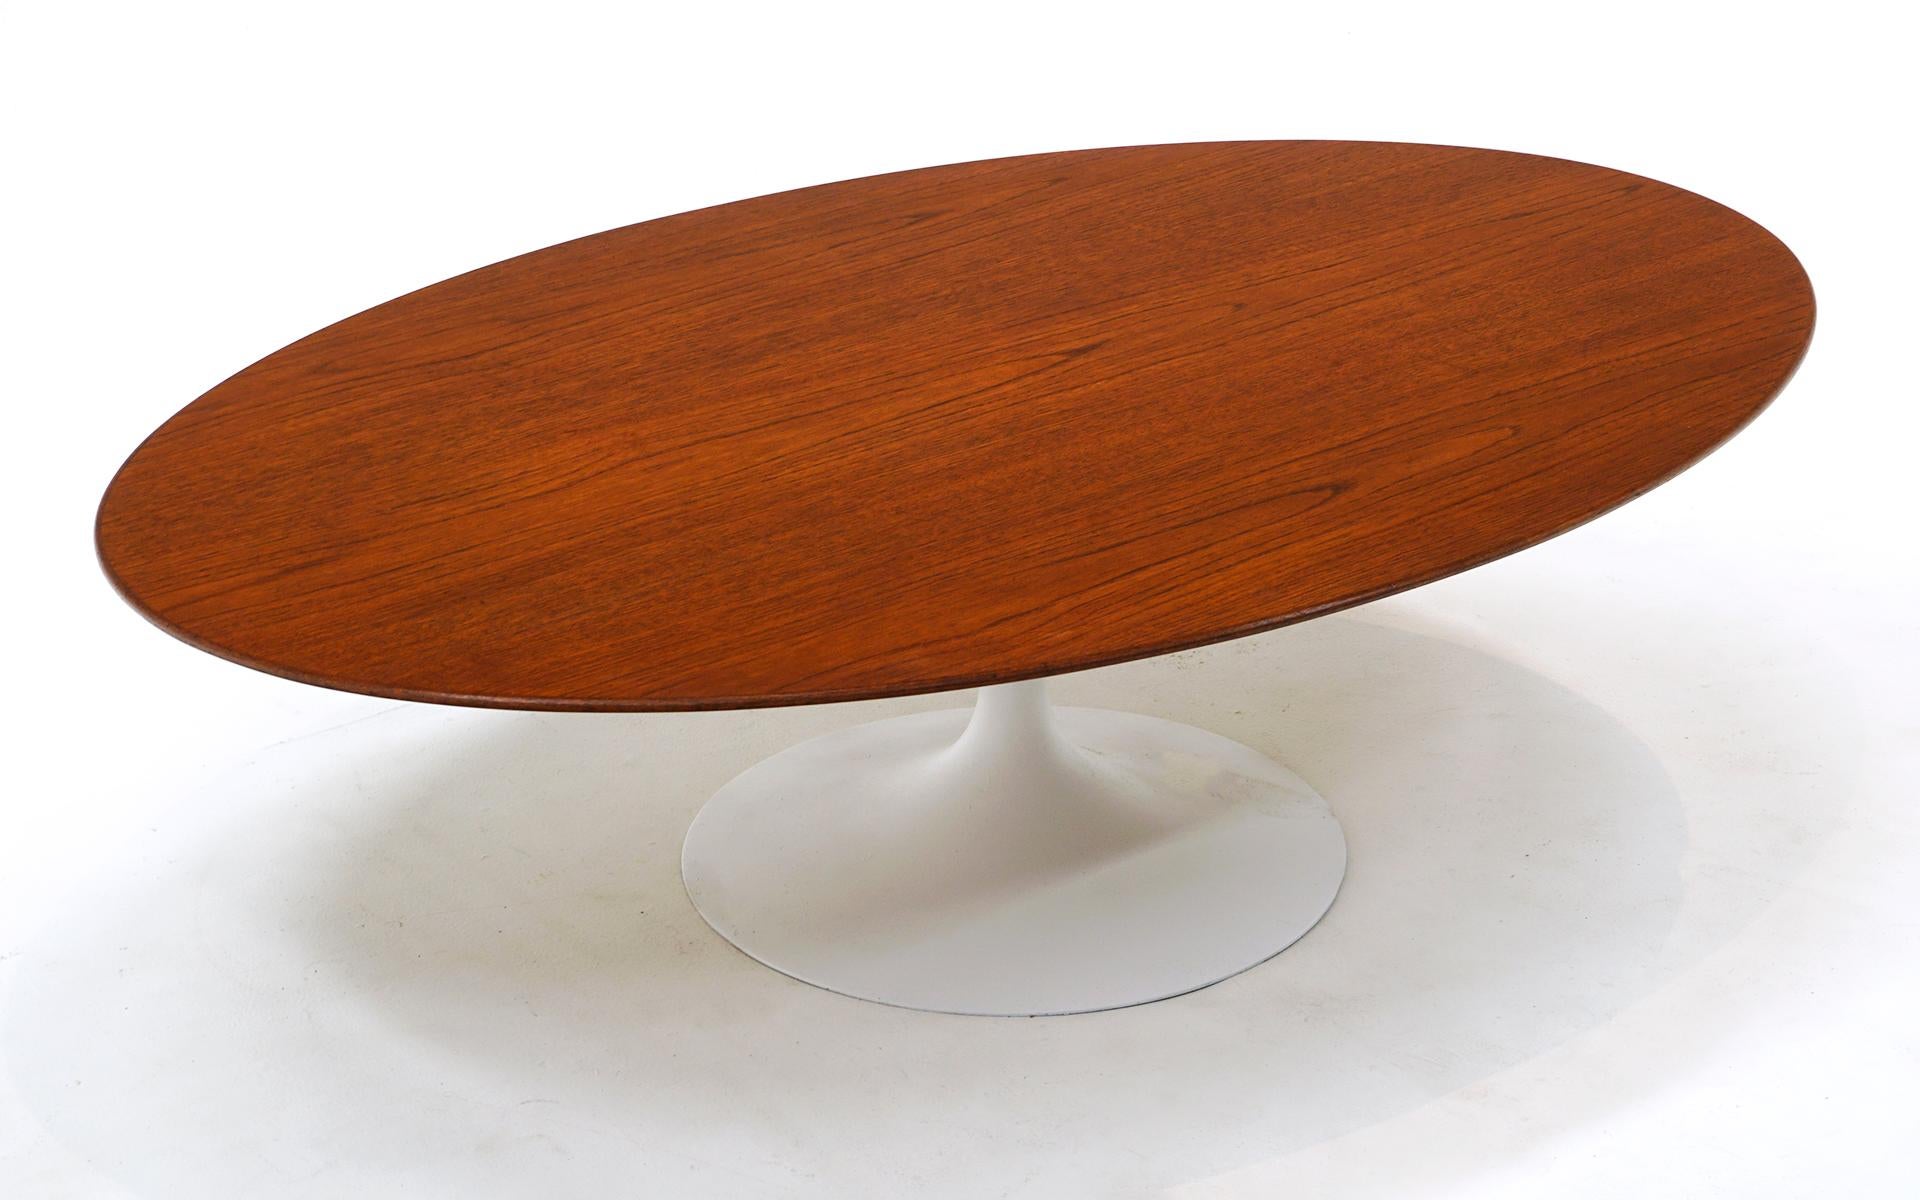 Mid-Century Modern Early Oval Saarinen for Knoll Coffee Table. Out of Production 54